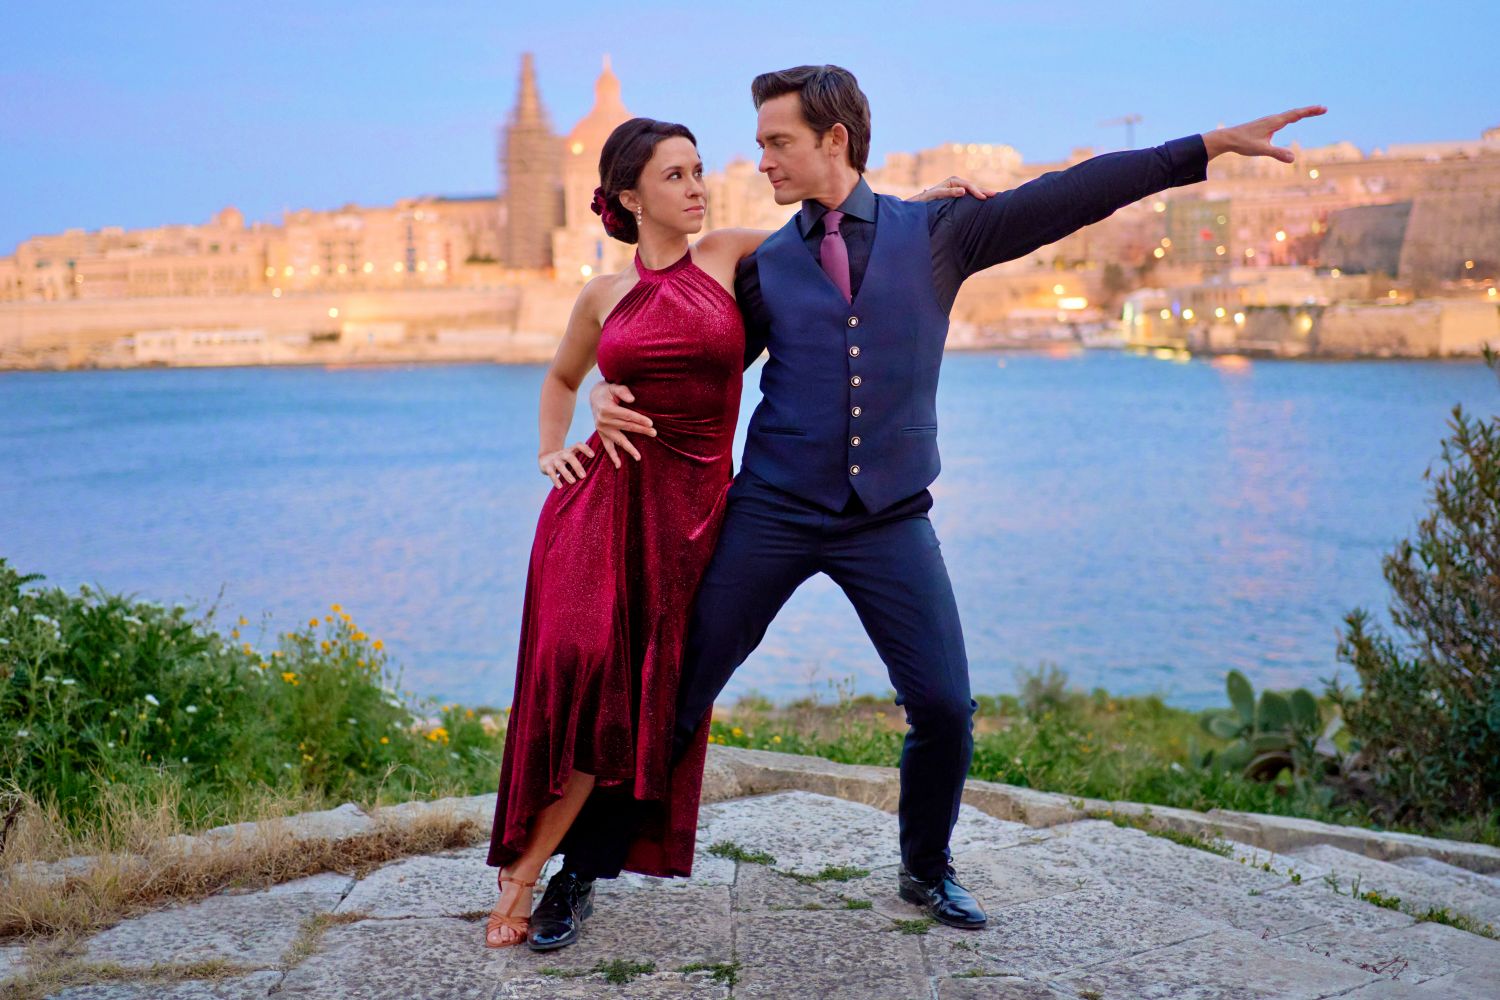 Lacey Chabert and Will Kemp in The Dancing Detective: A DeadlyTango on Hallmark Movies & Mysteries